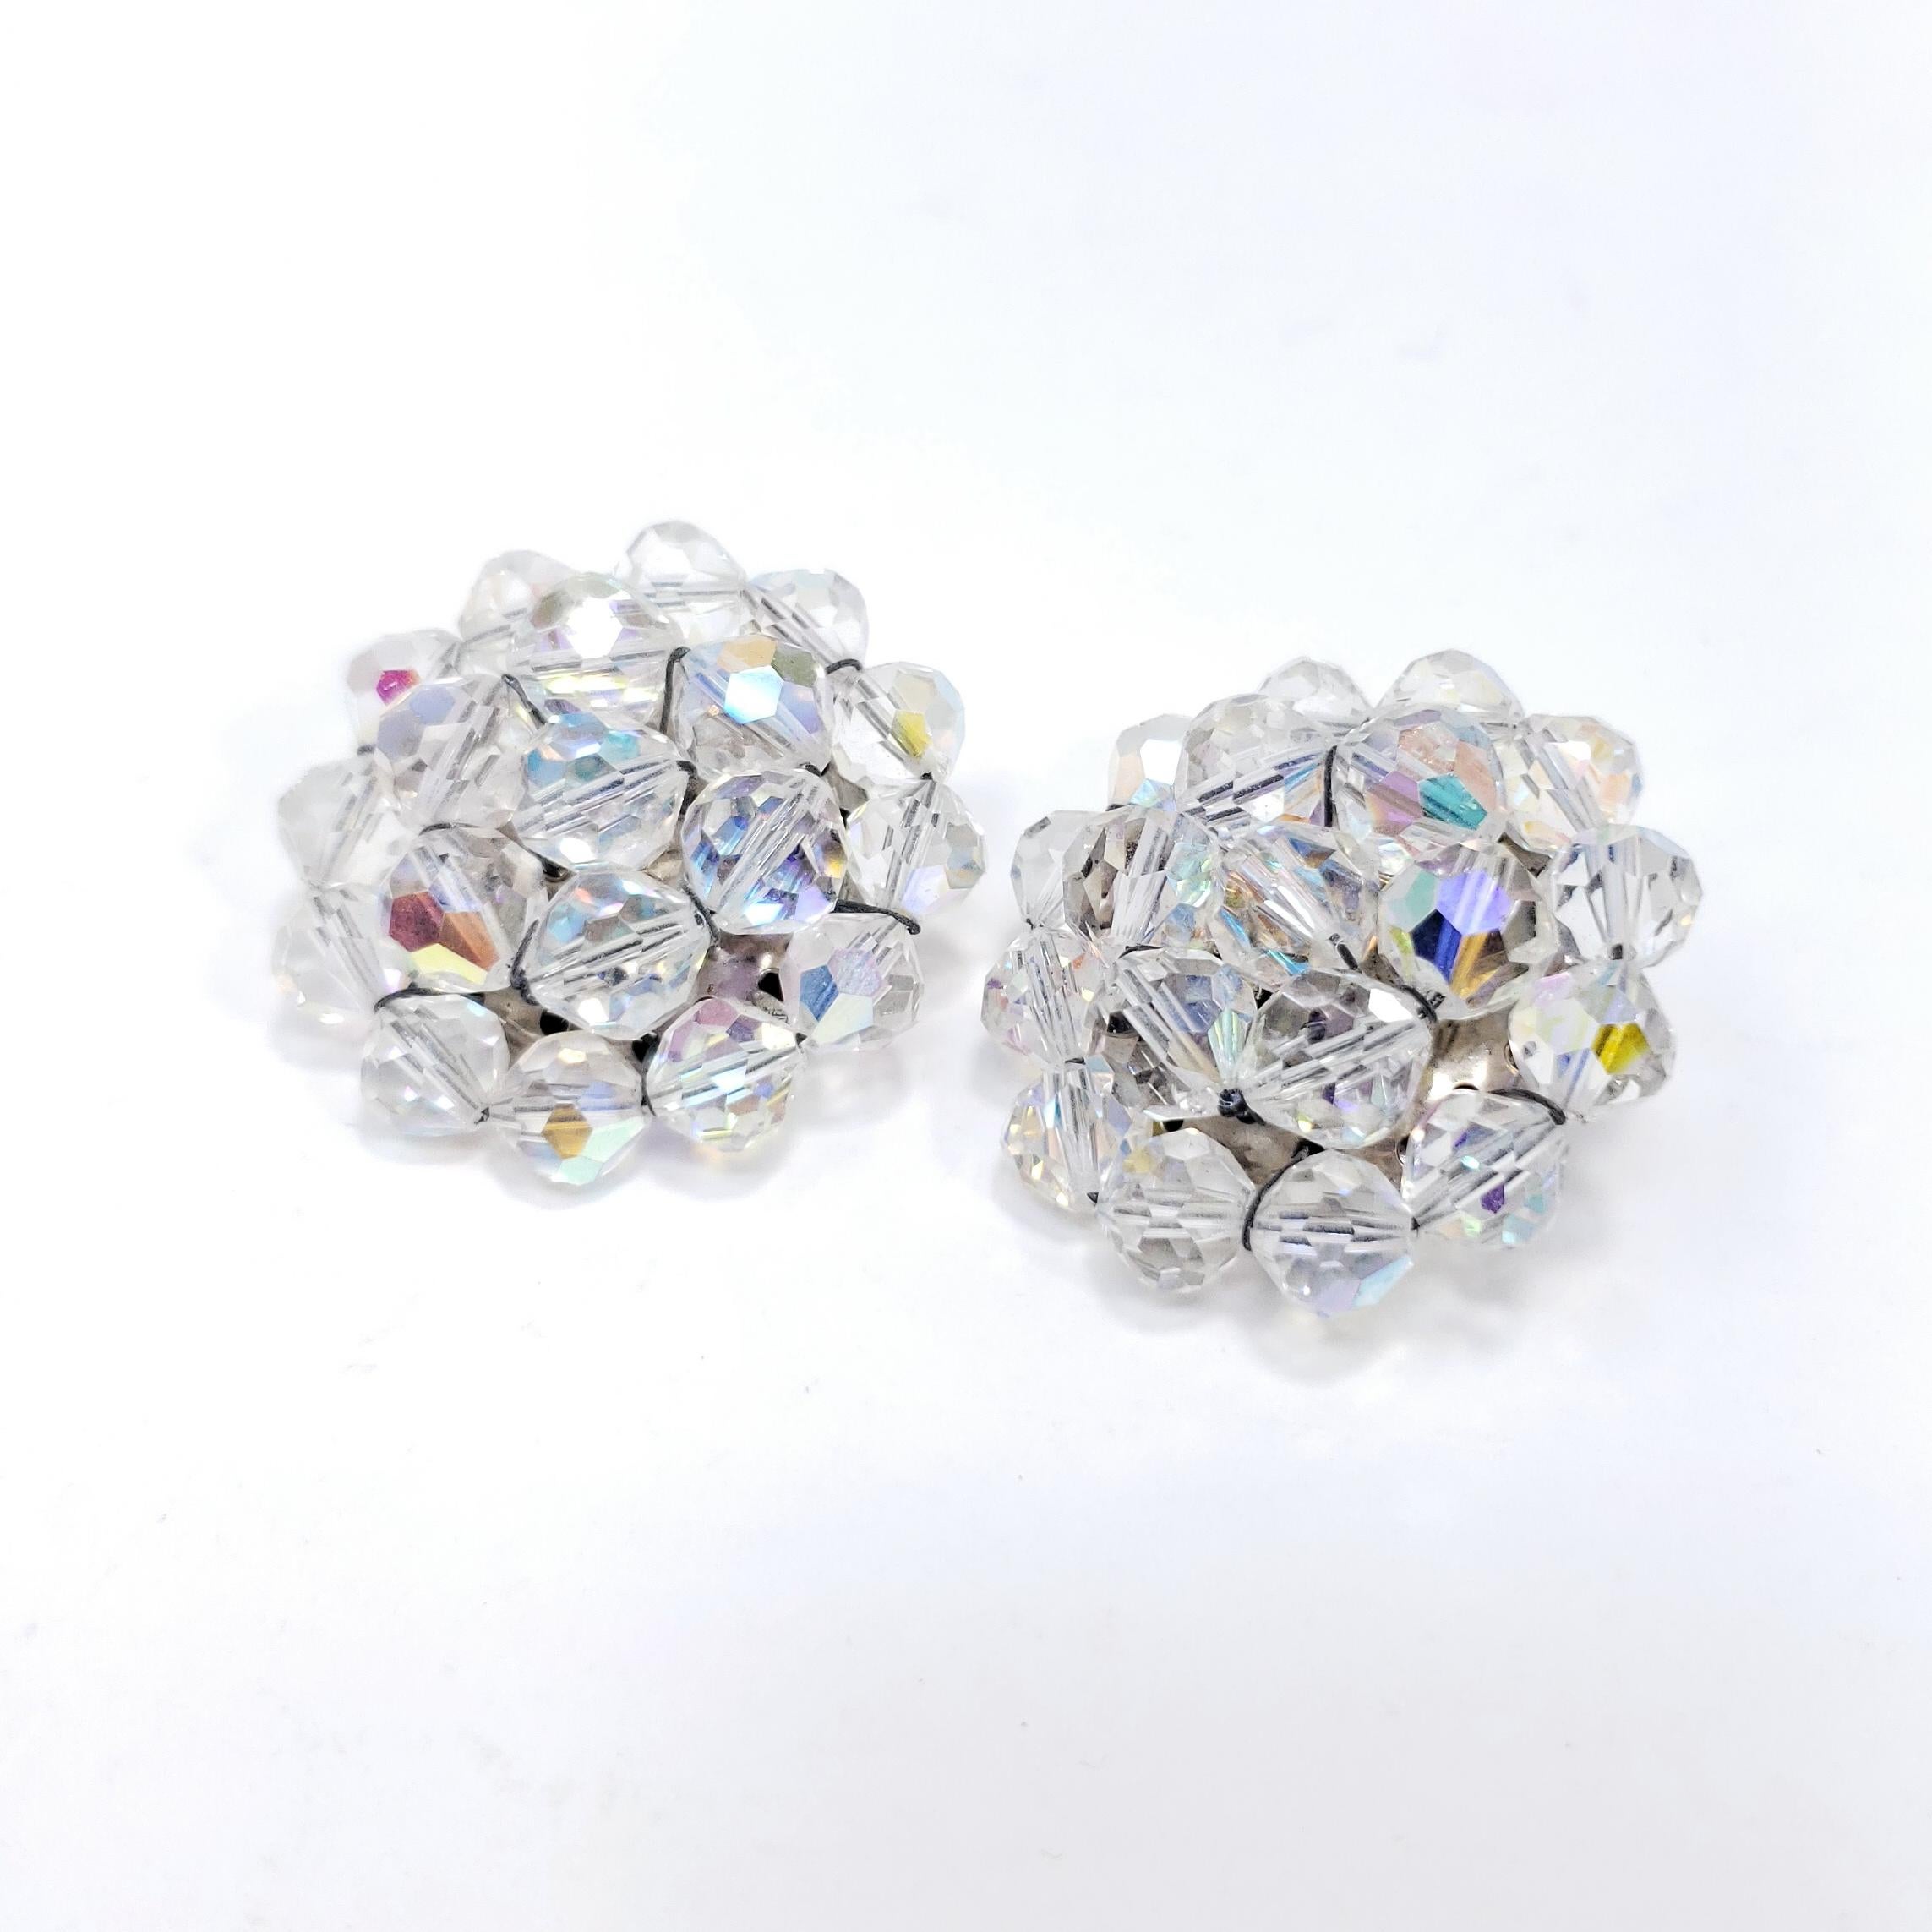 Retro chic! These vintage clip on earrings feature a cluster of clear aurora borealis crystals set on a silver-tone clip.

Circa late 1900s.